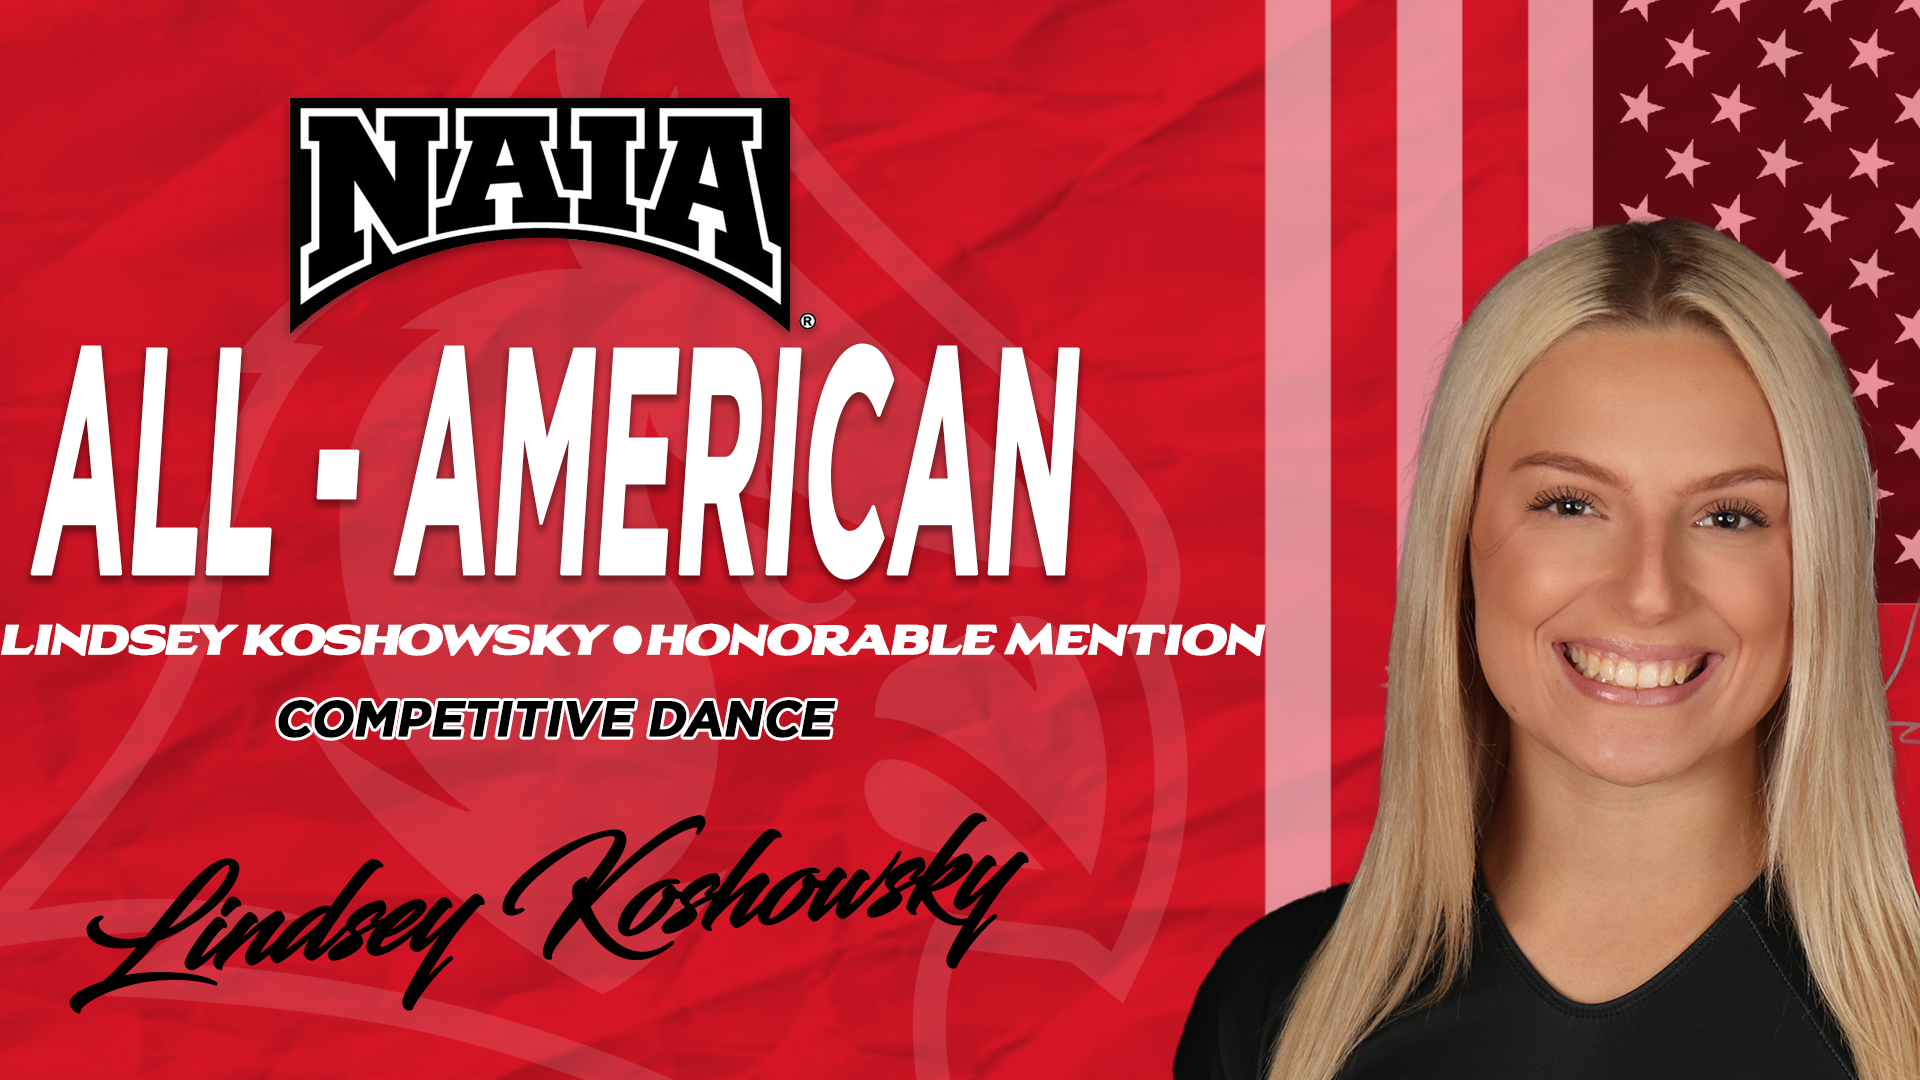 Dance's Koshowsky named NAIA All-American Honorable Mention